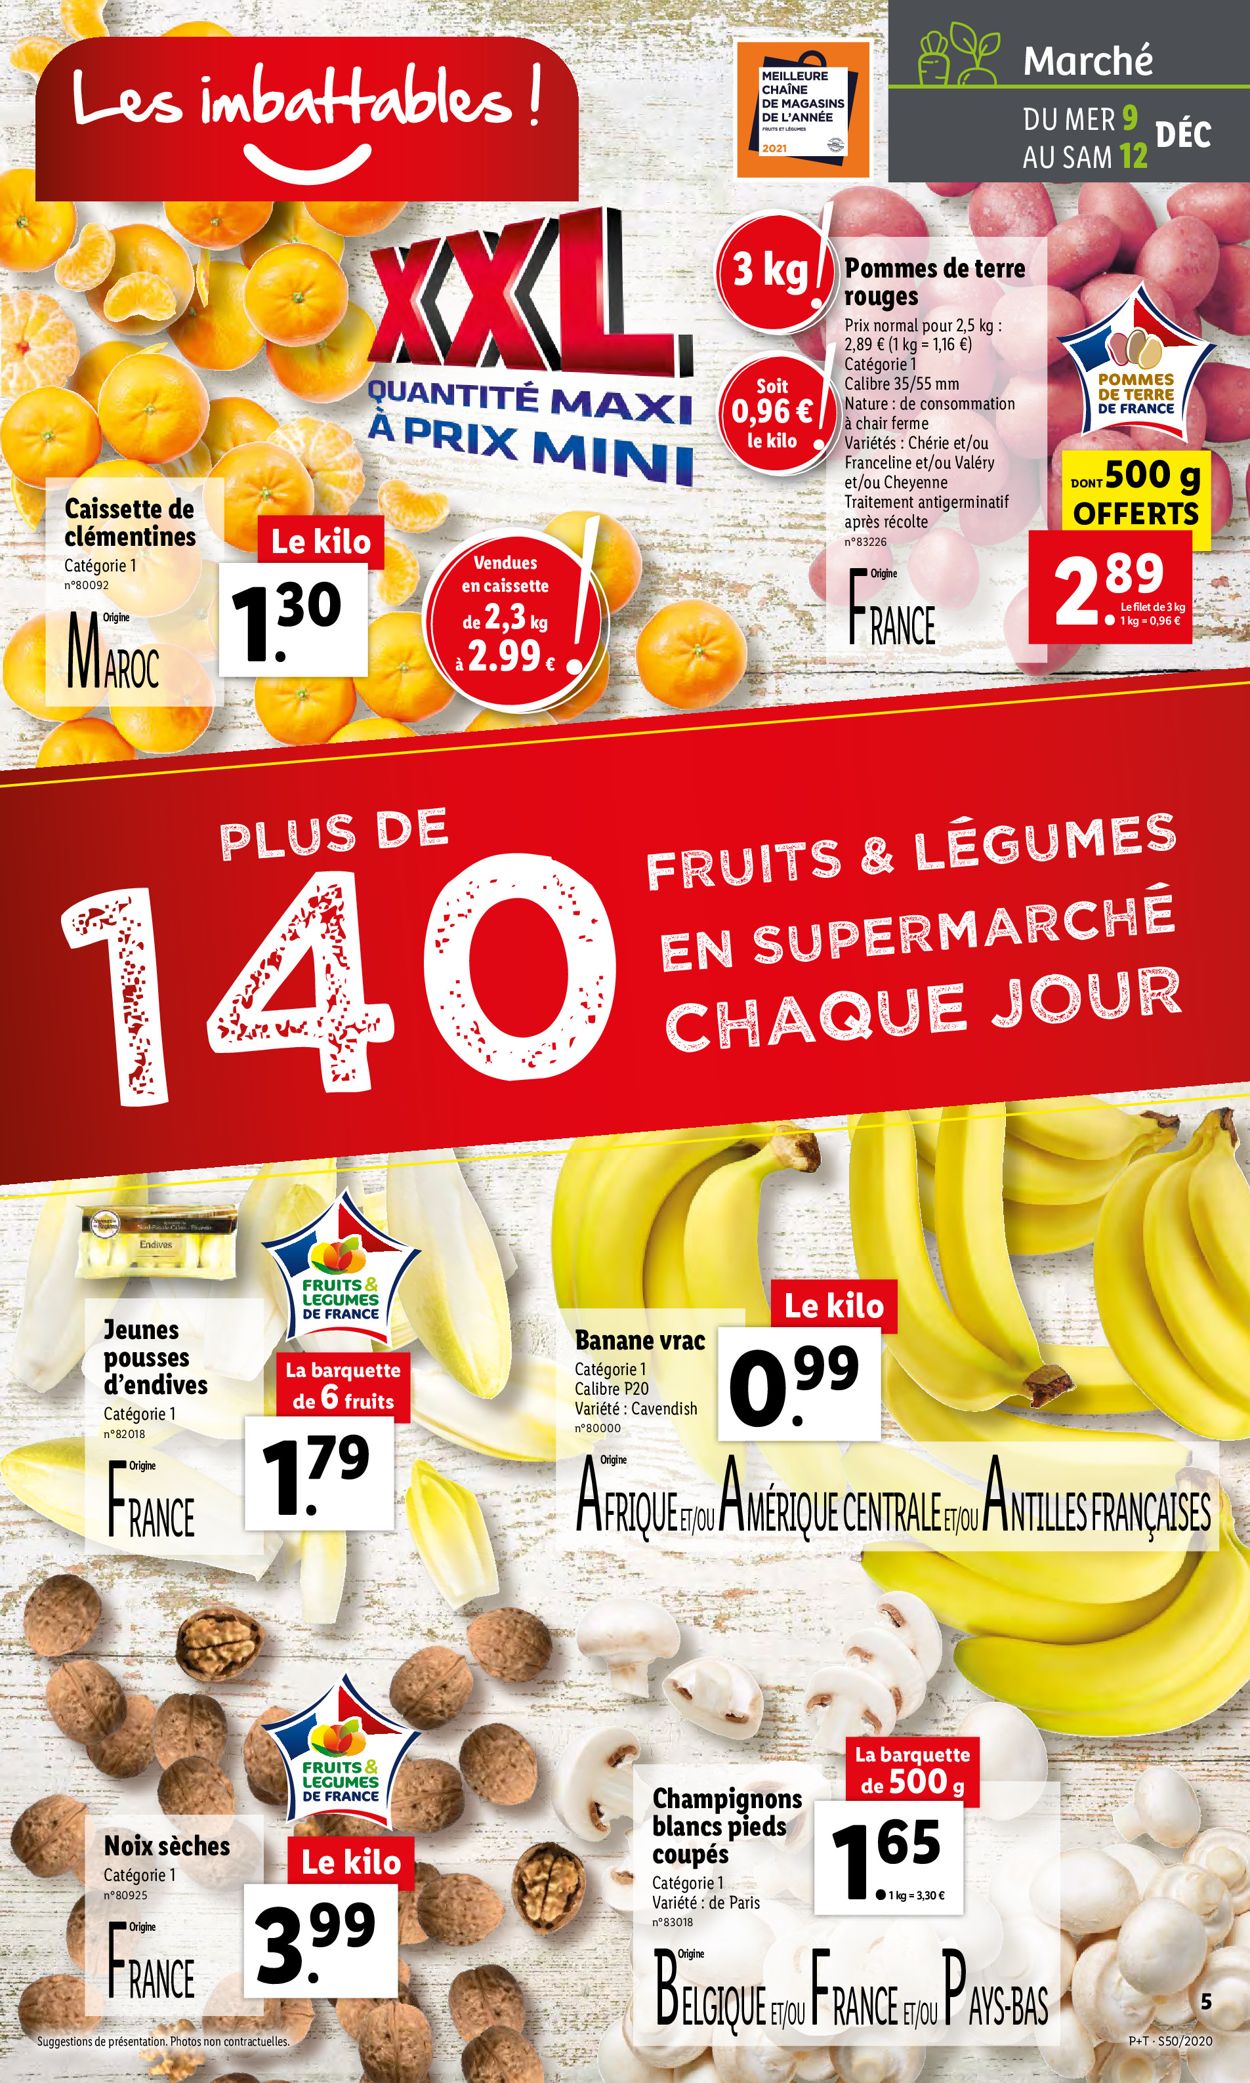 Lidl Catalogue - 09.12-15.12.2020 (Page 5)